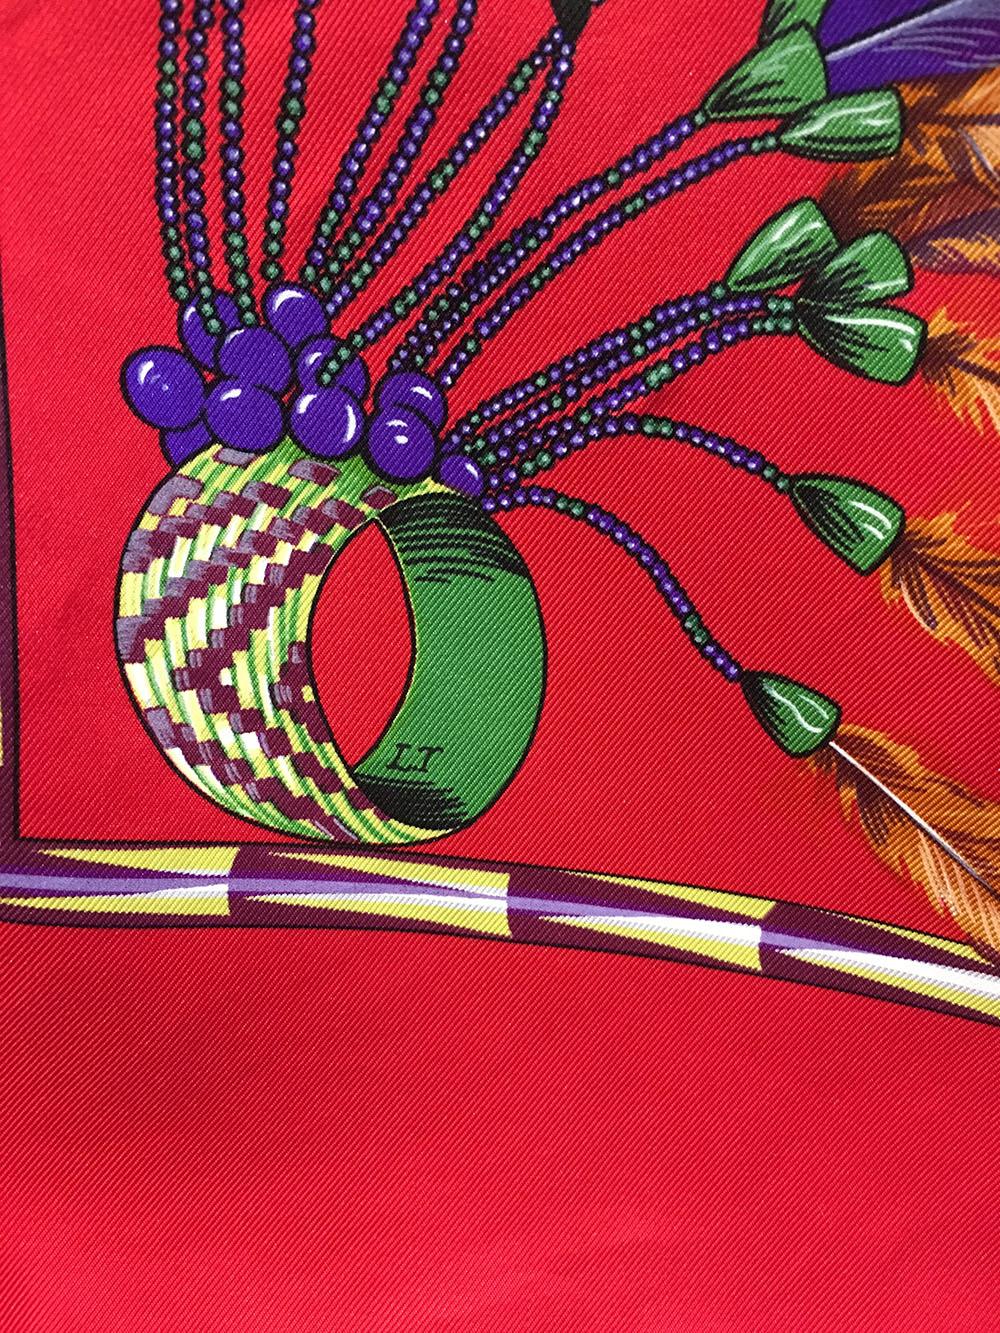 Authentic Hermes Brazil Scarf c1988 in excellent condition. Original silk screen design by Laurence Bourthoumieux features a multi colored floral headdress design native to the culture of Brazil over a red background and surrounded by various